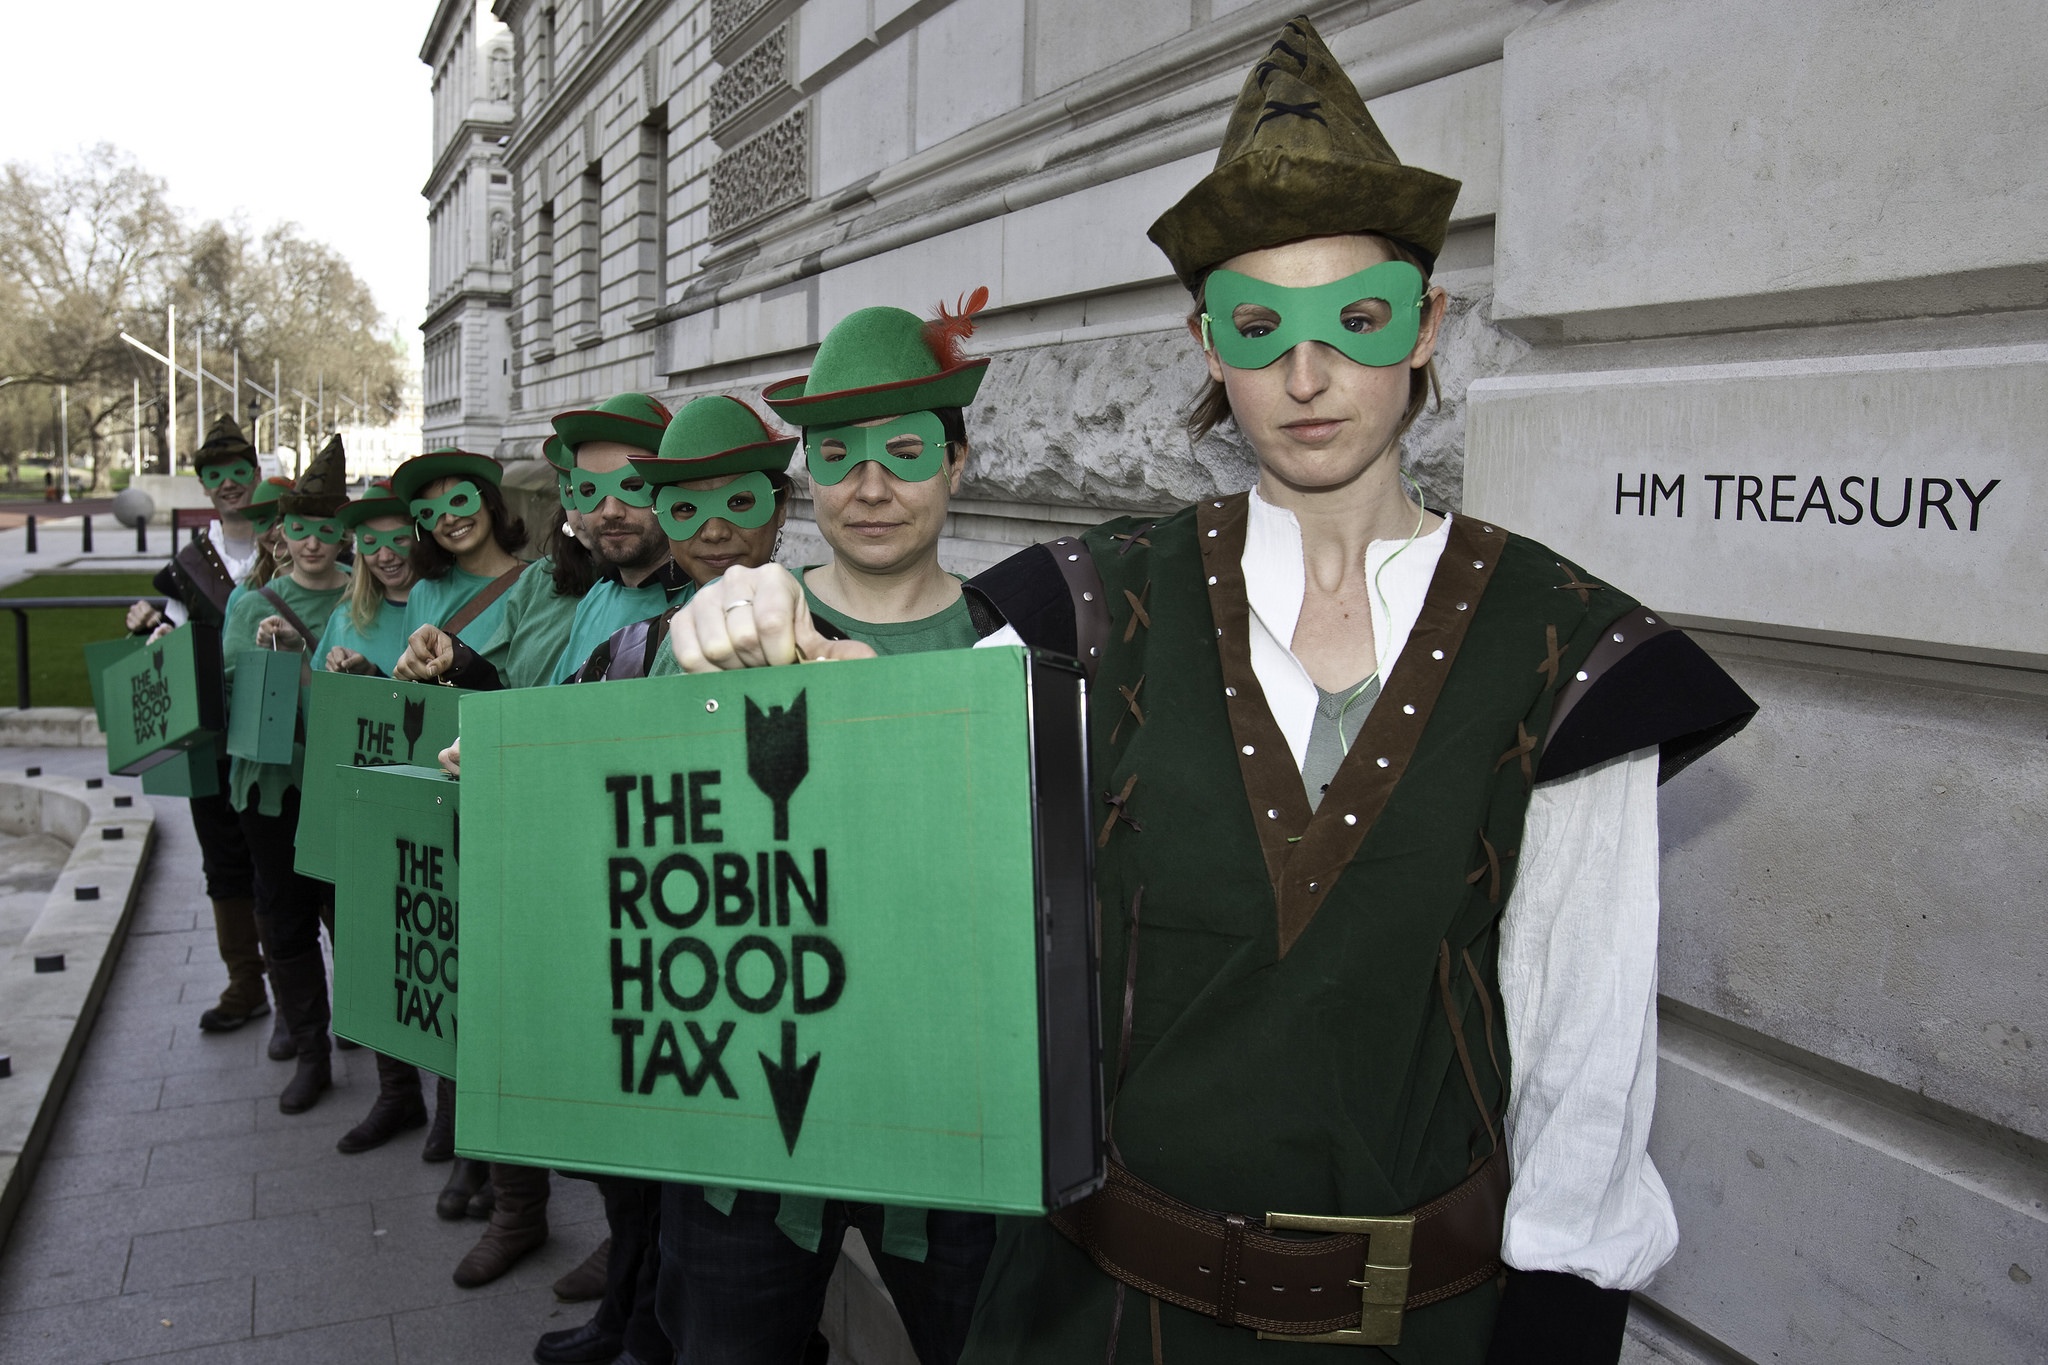 Robinhood Tax: Meaning And Its Effects On The Online Bitcoin Industry 24